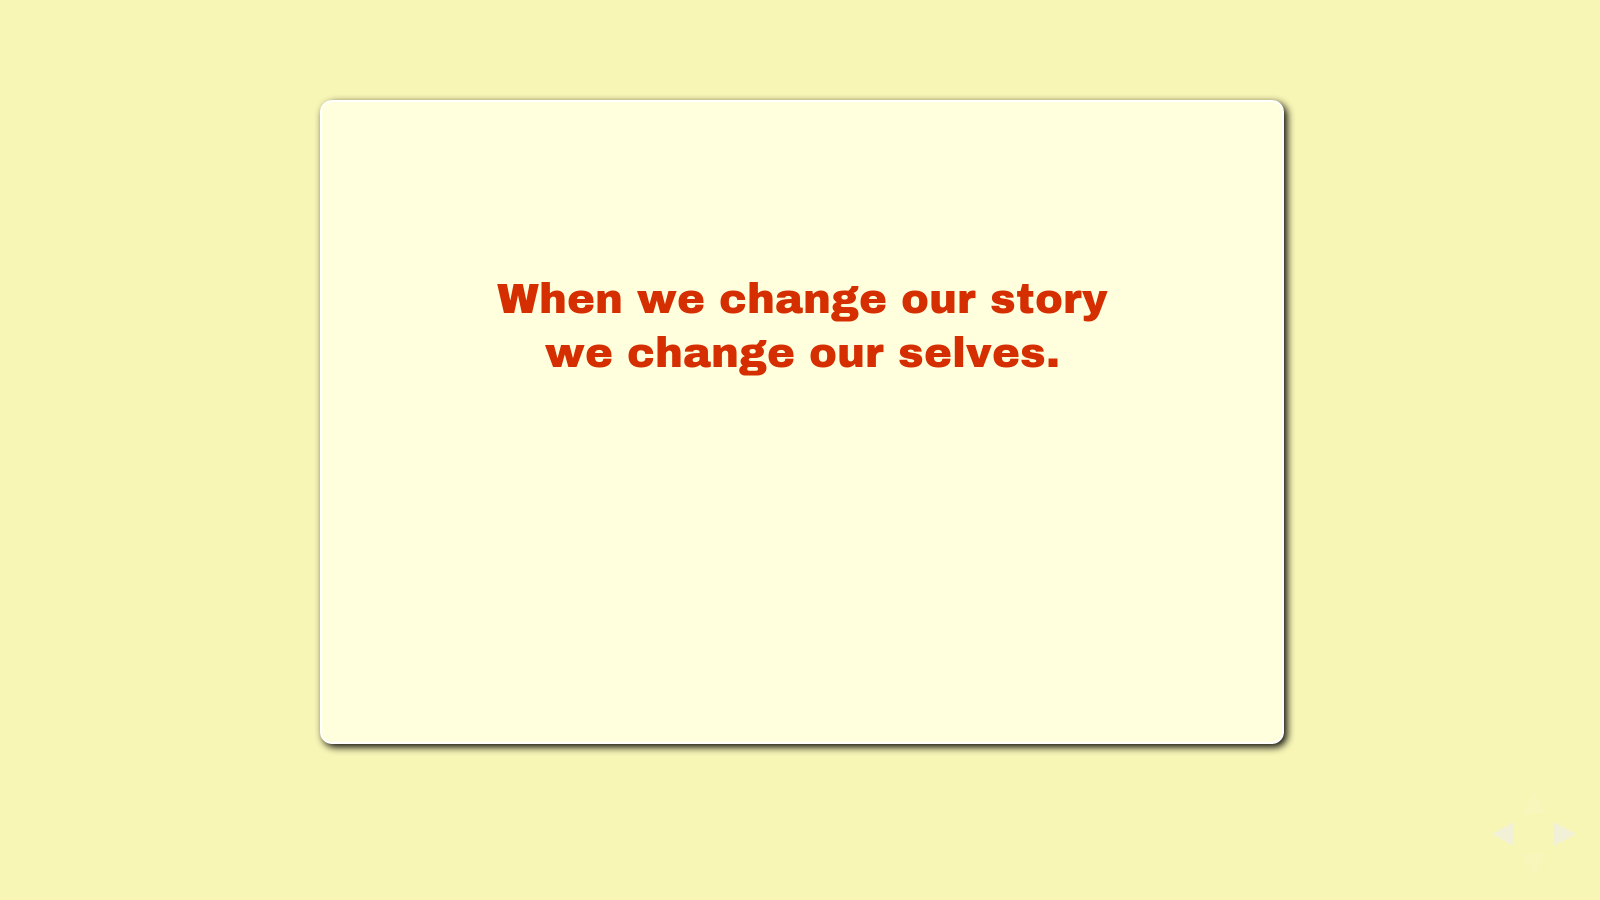 Slide: When we change our story, we change our selves